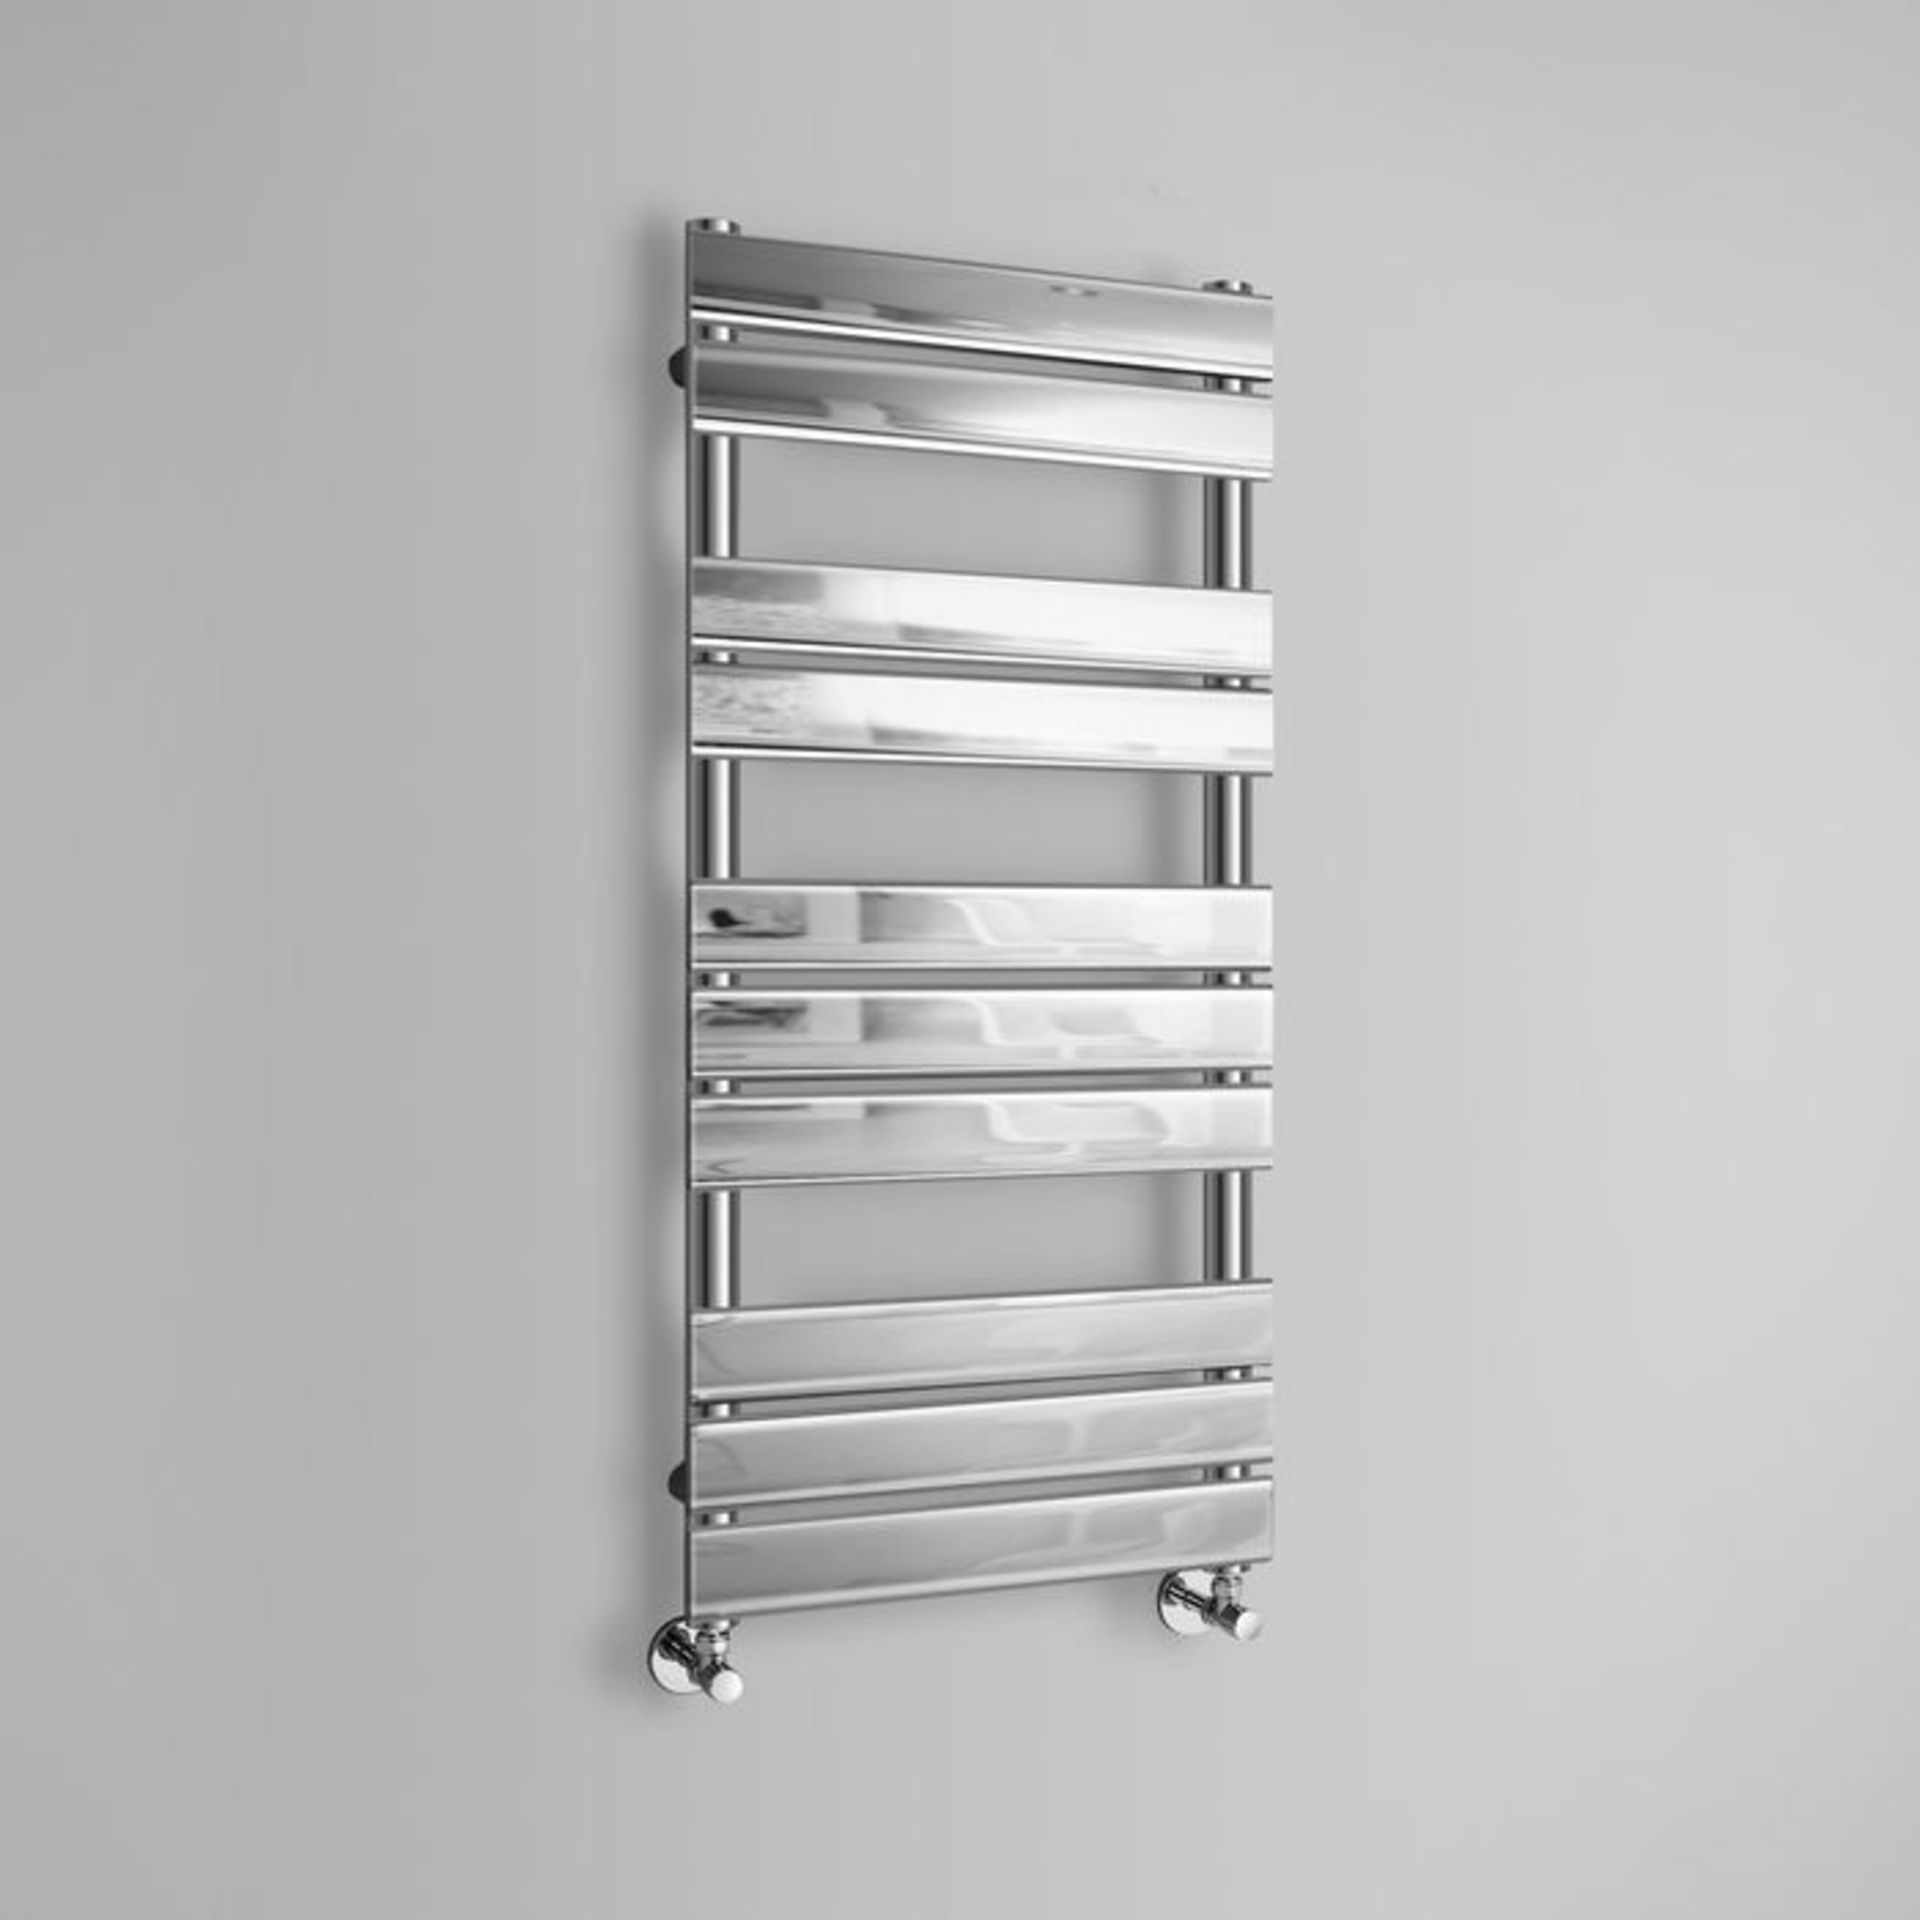 (LL119) 700x400mm Chrome Flat Panel Ladder Towel Radiator. RRP £229.99. We use low carbon steel of - Image 3 of 3